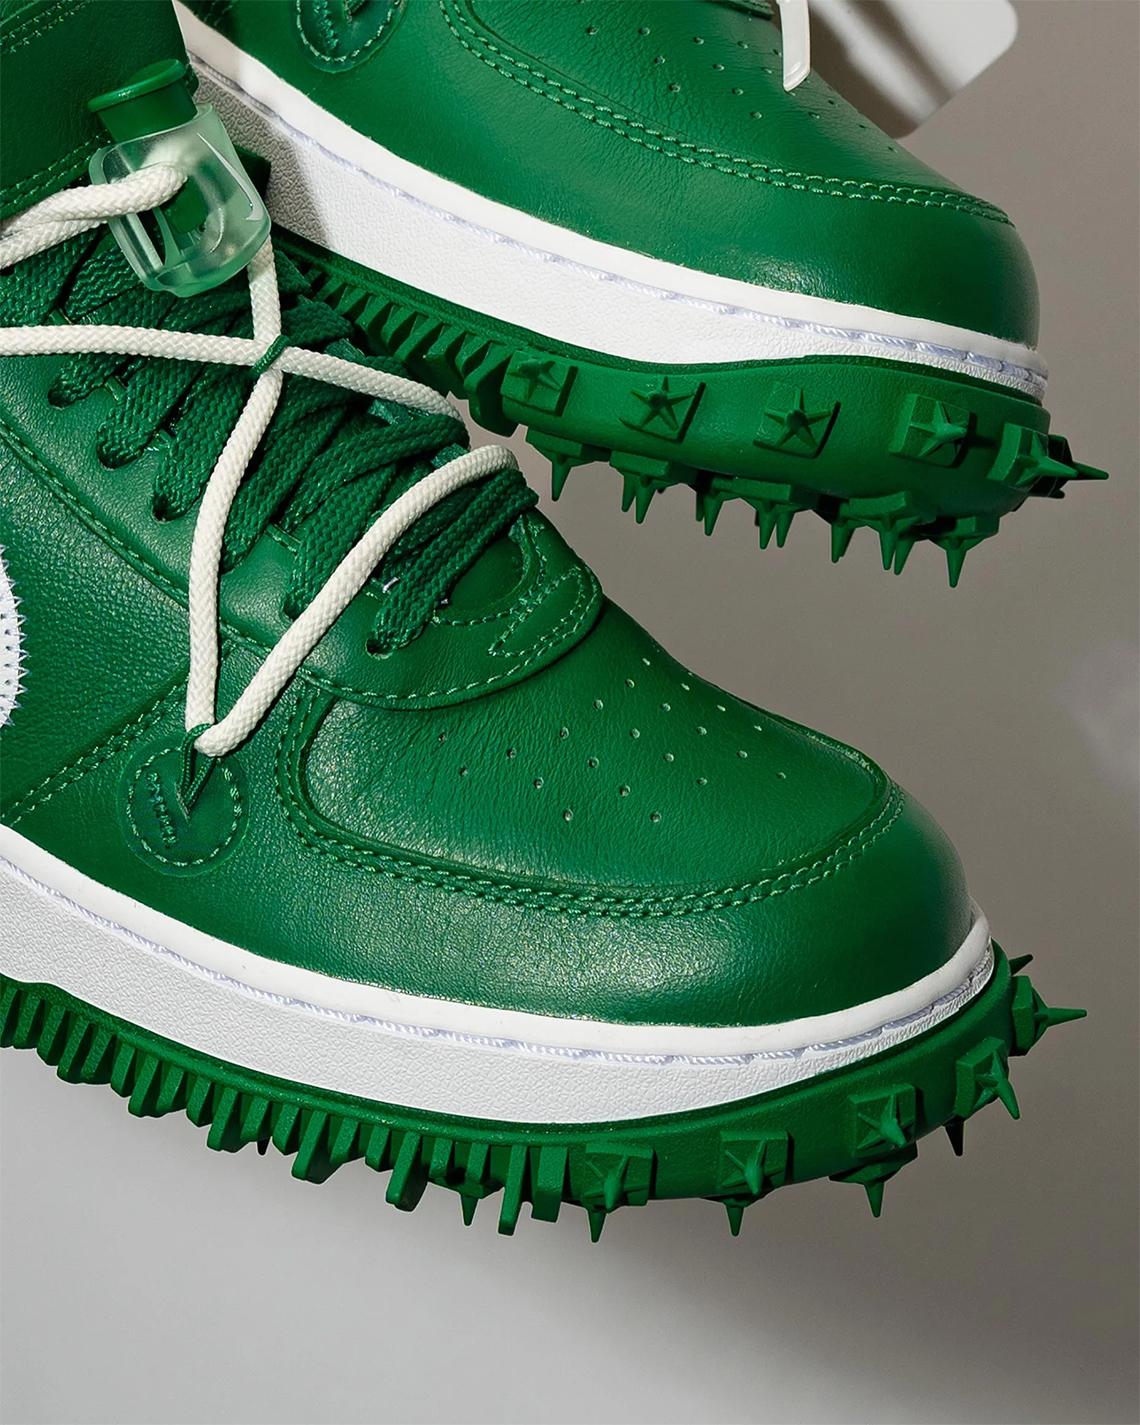 NIKE X OFF-WHITE AIR FORCE 1 MID “PINE GREEN”